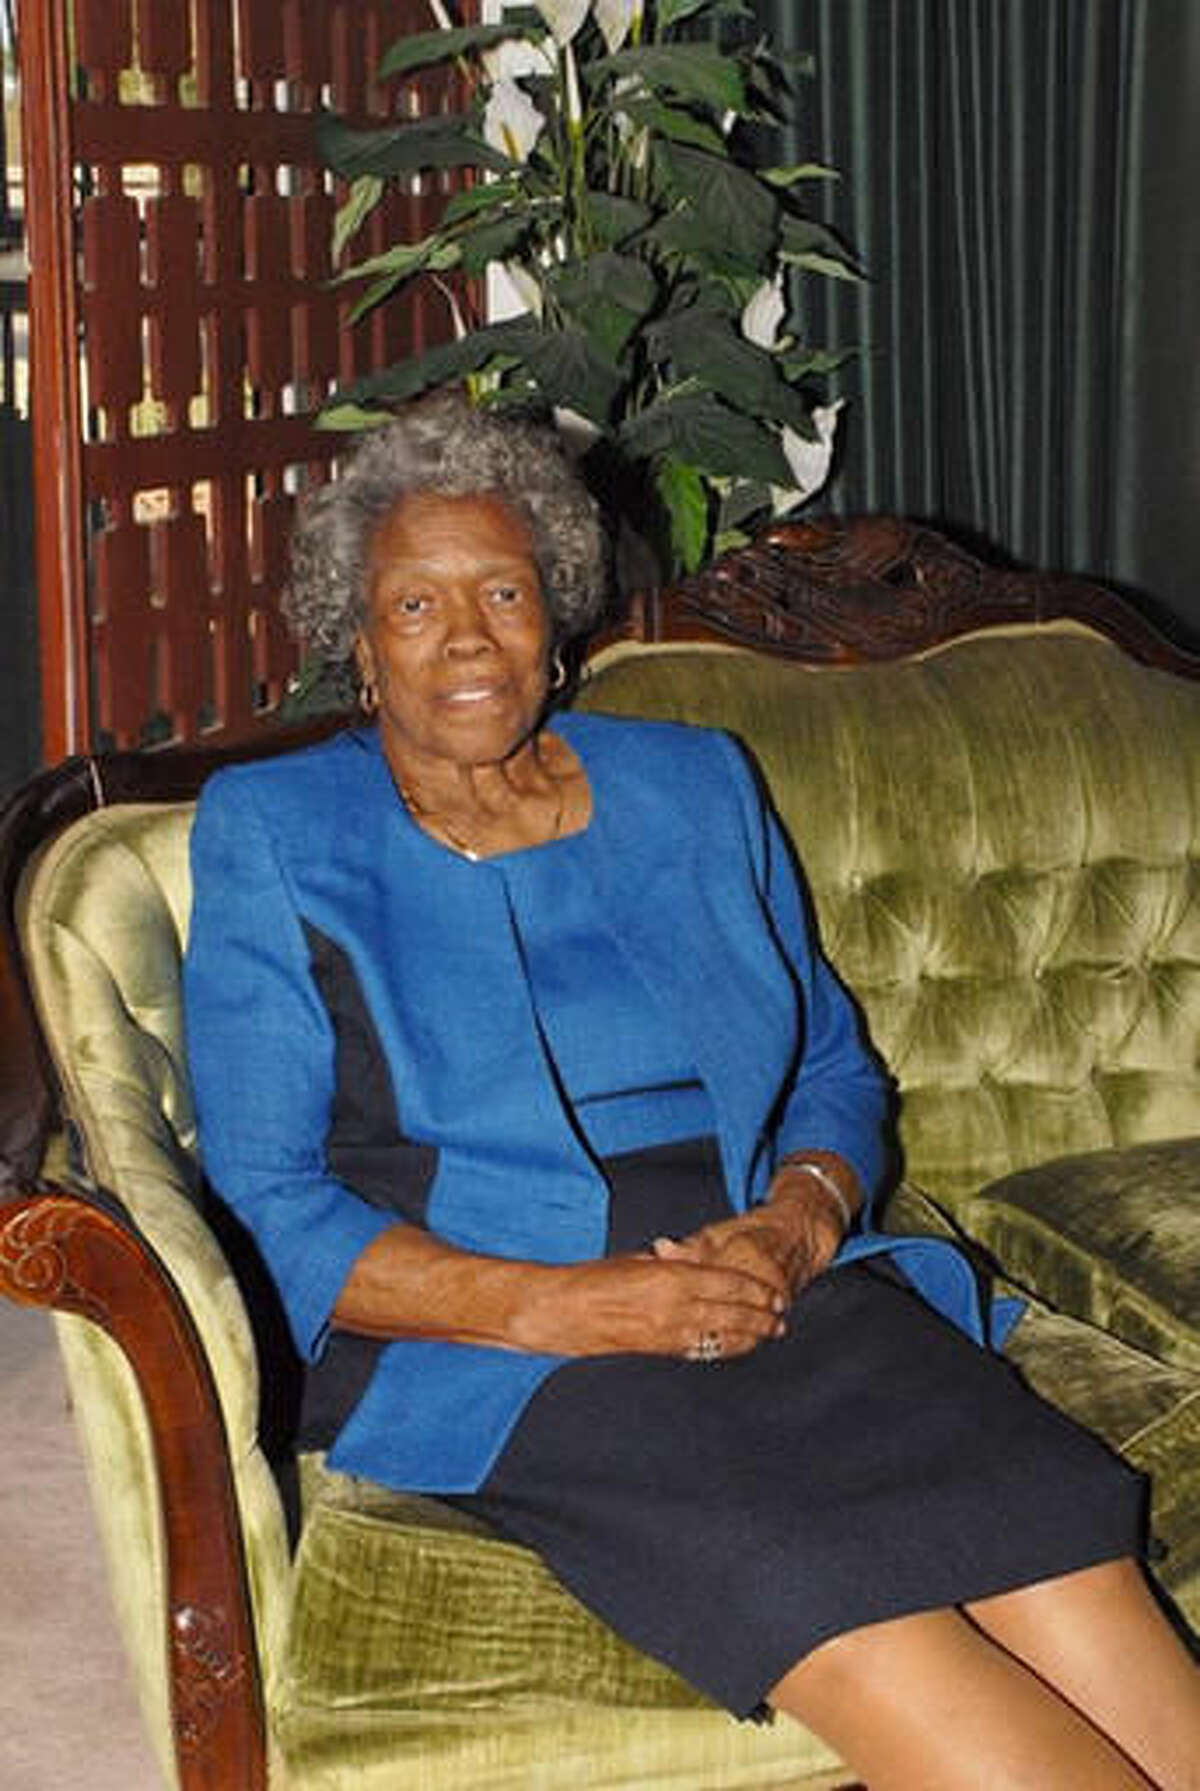 This photo provided by the family of Stella Parson, shows Parson, the first black woman to graduate from college in the state of Nevada. Parson passed away at 86 on July 29, 2016. A memorial service was planned in Las Vegas on Friday, Aug. 5, 2016. Parson earned a bachelor's degree in English from the University of Nevada, Reno in 1952 at a time most of the nation was still segregated. (Courtesy of Stella Parson Family via AP).